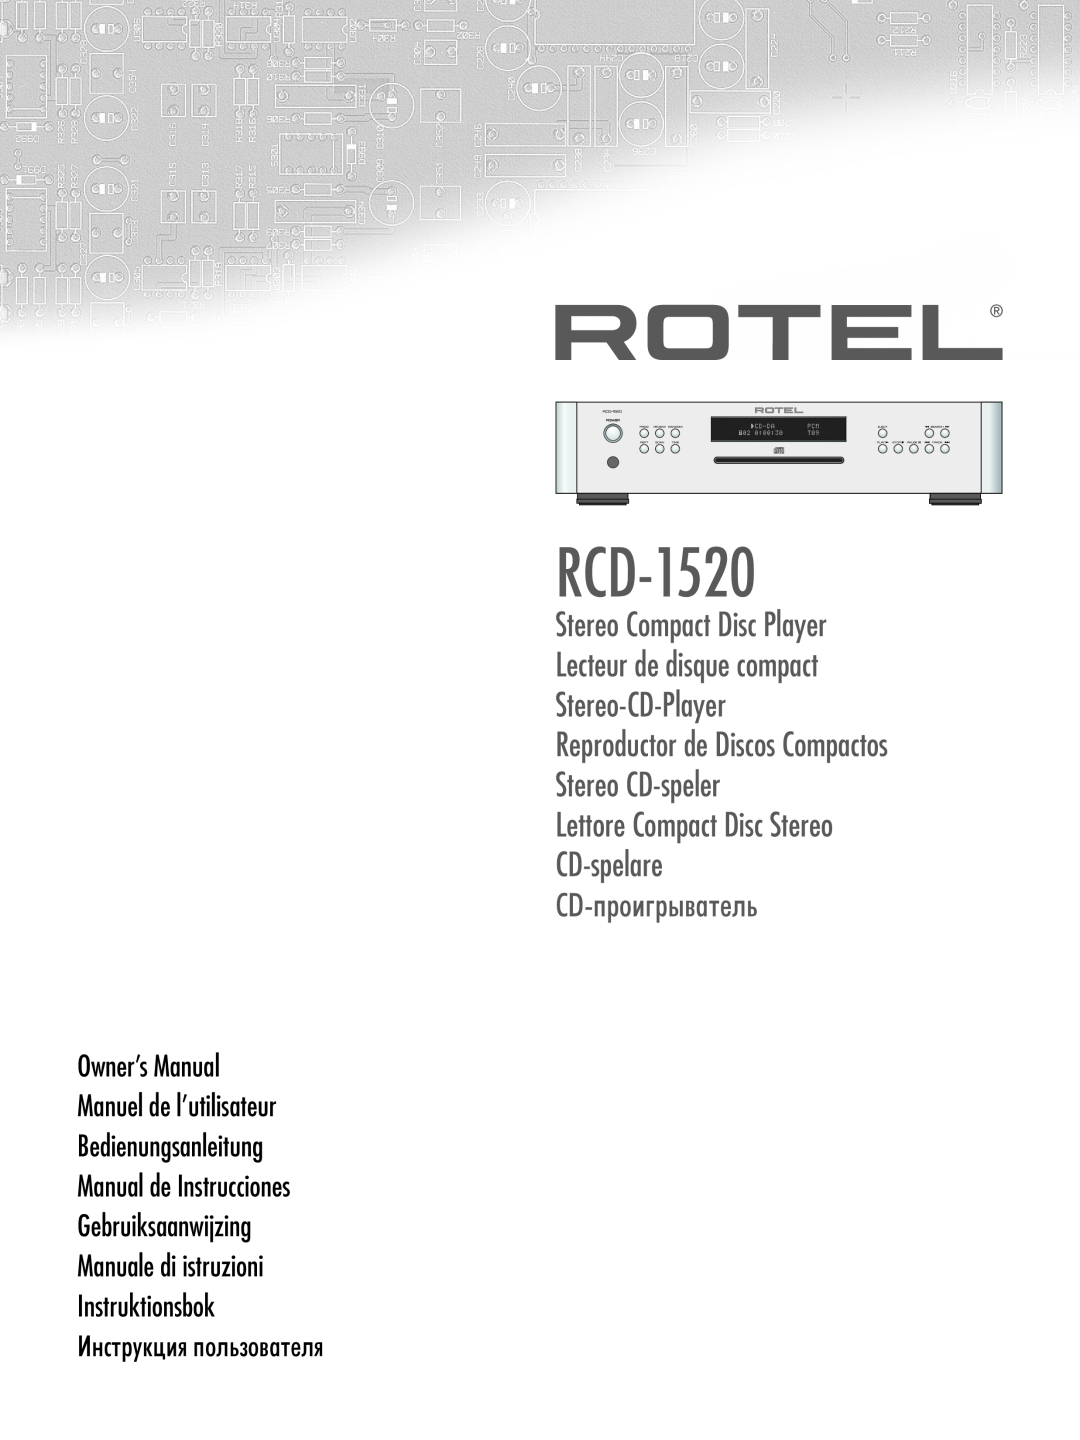 Rotel RCD-1520 owner manual 